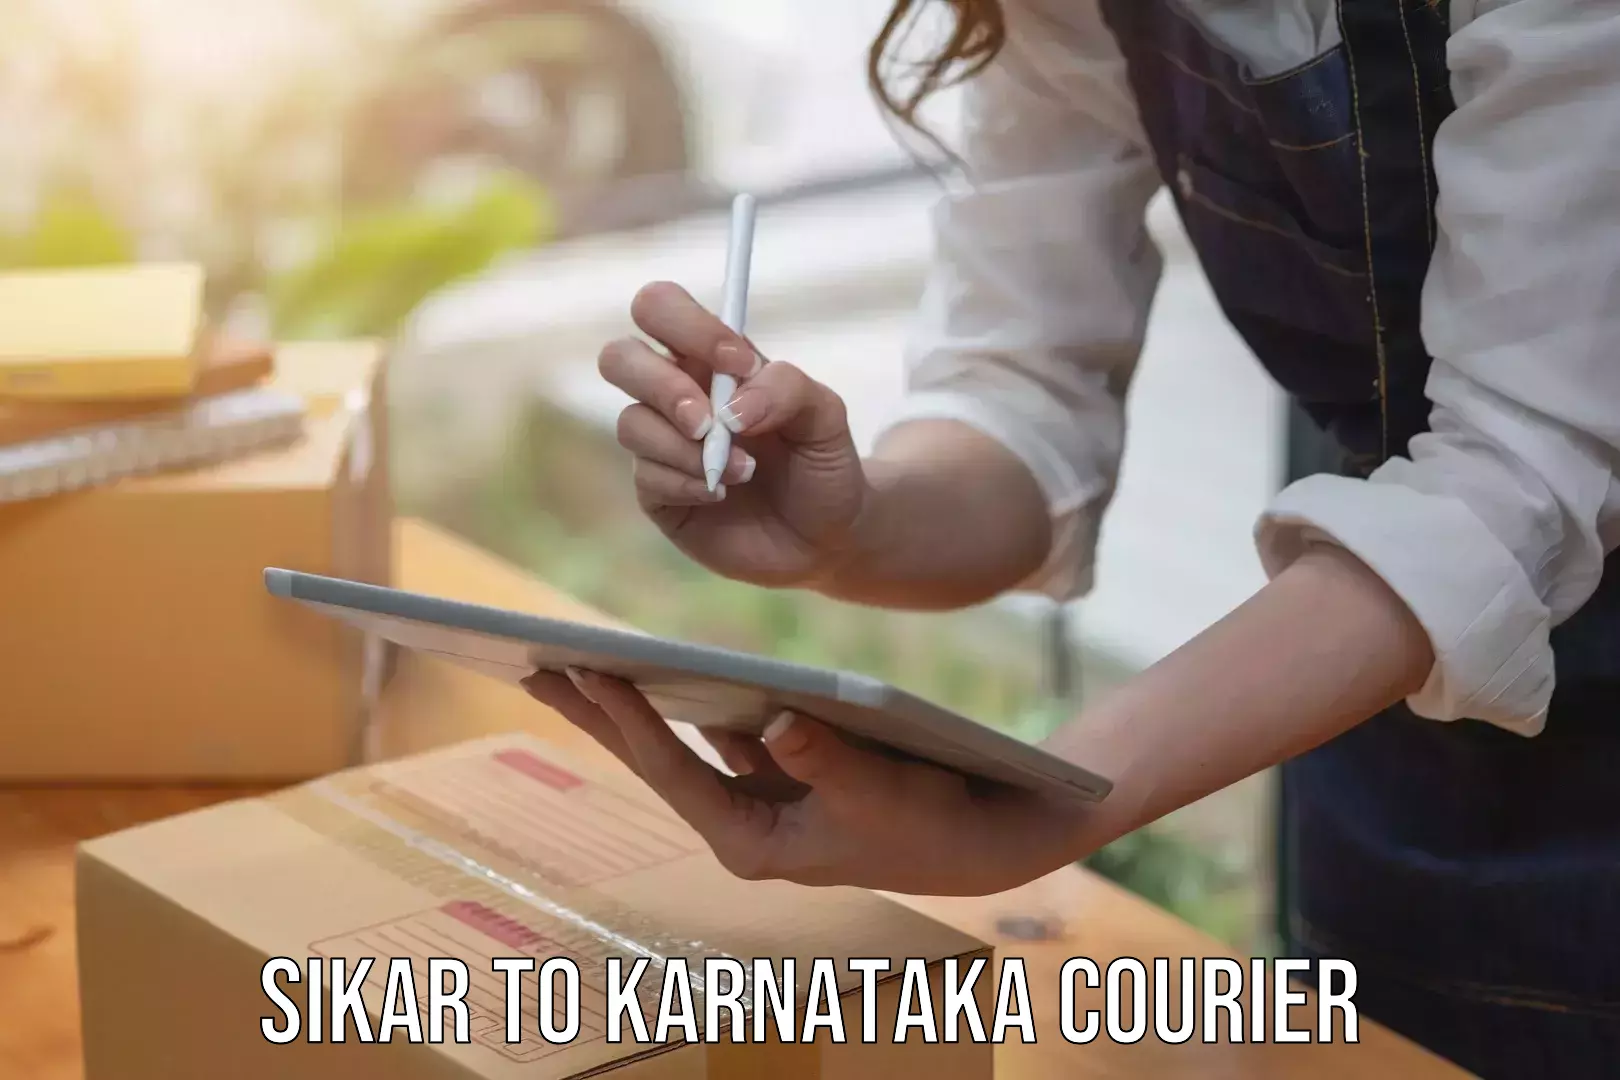 Professional courier handling Sikar to Manvi